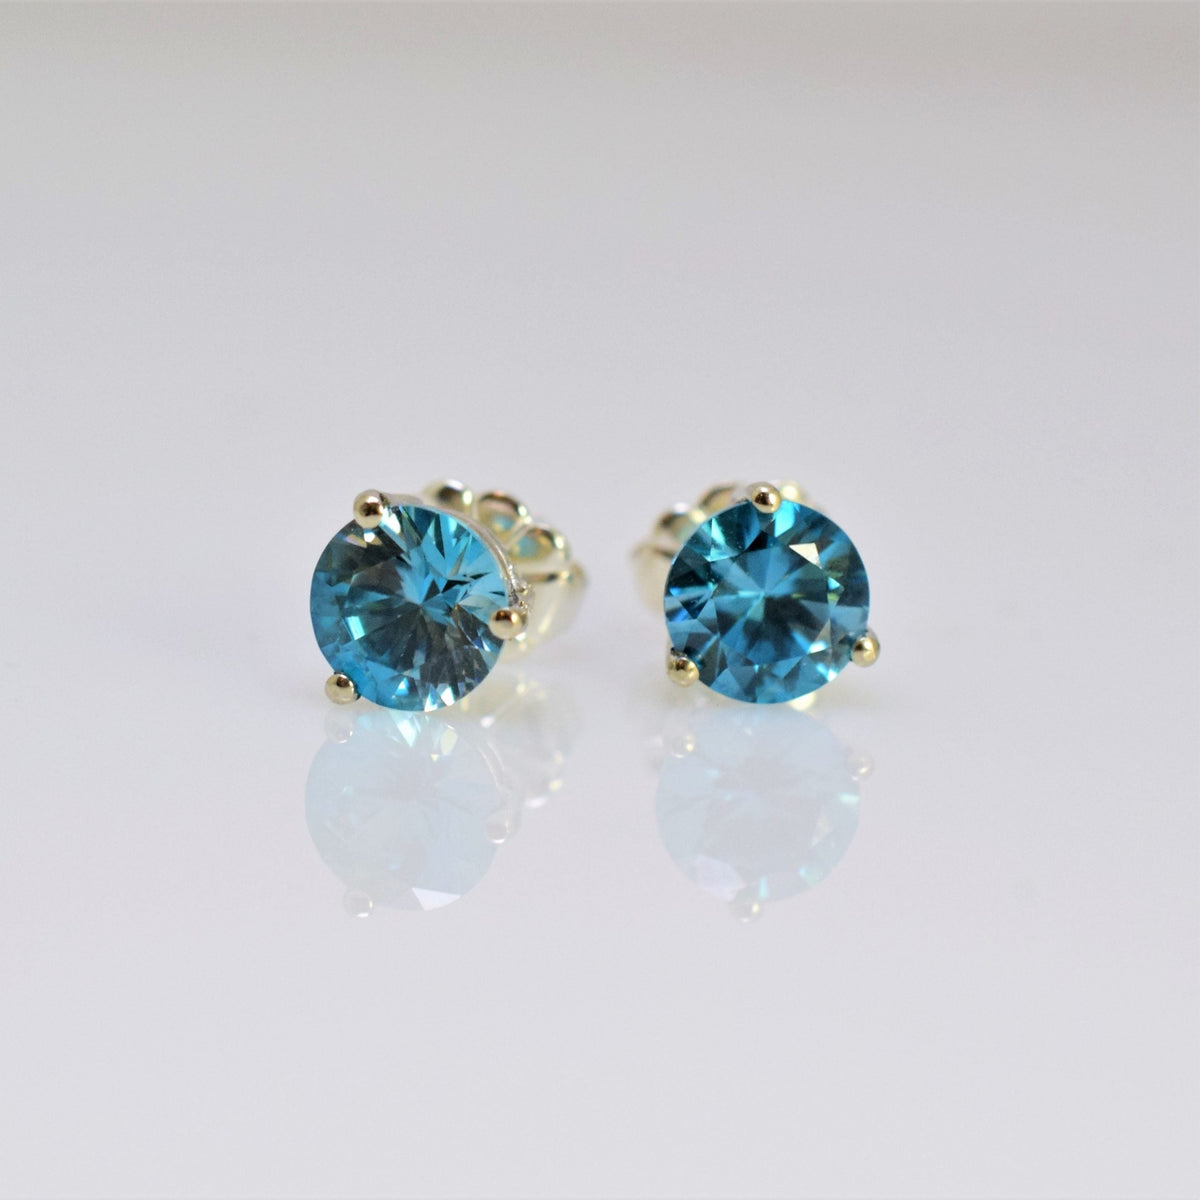 Dripping Blue Zircon Gemstone 14k White Gold Earrings For Sale at